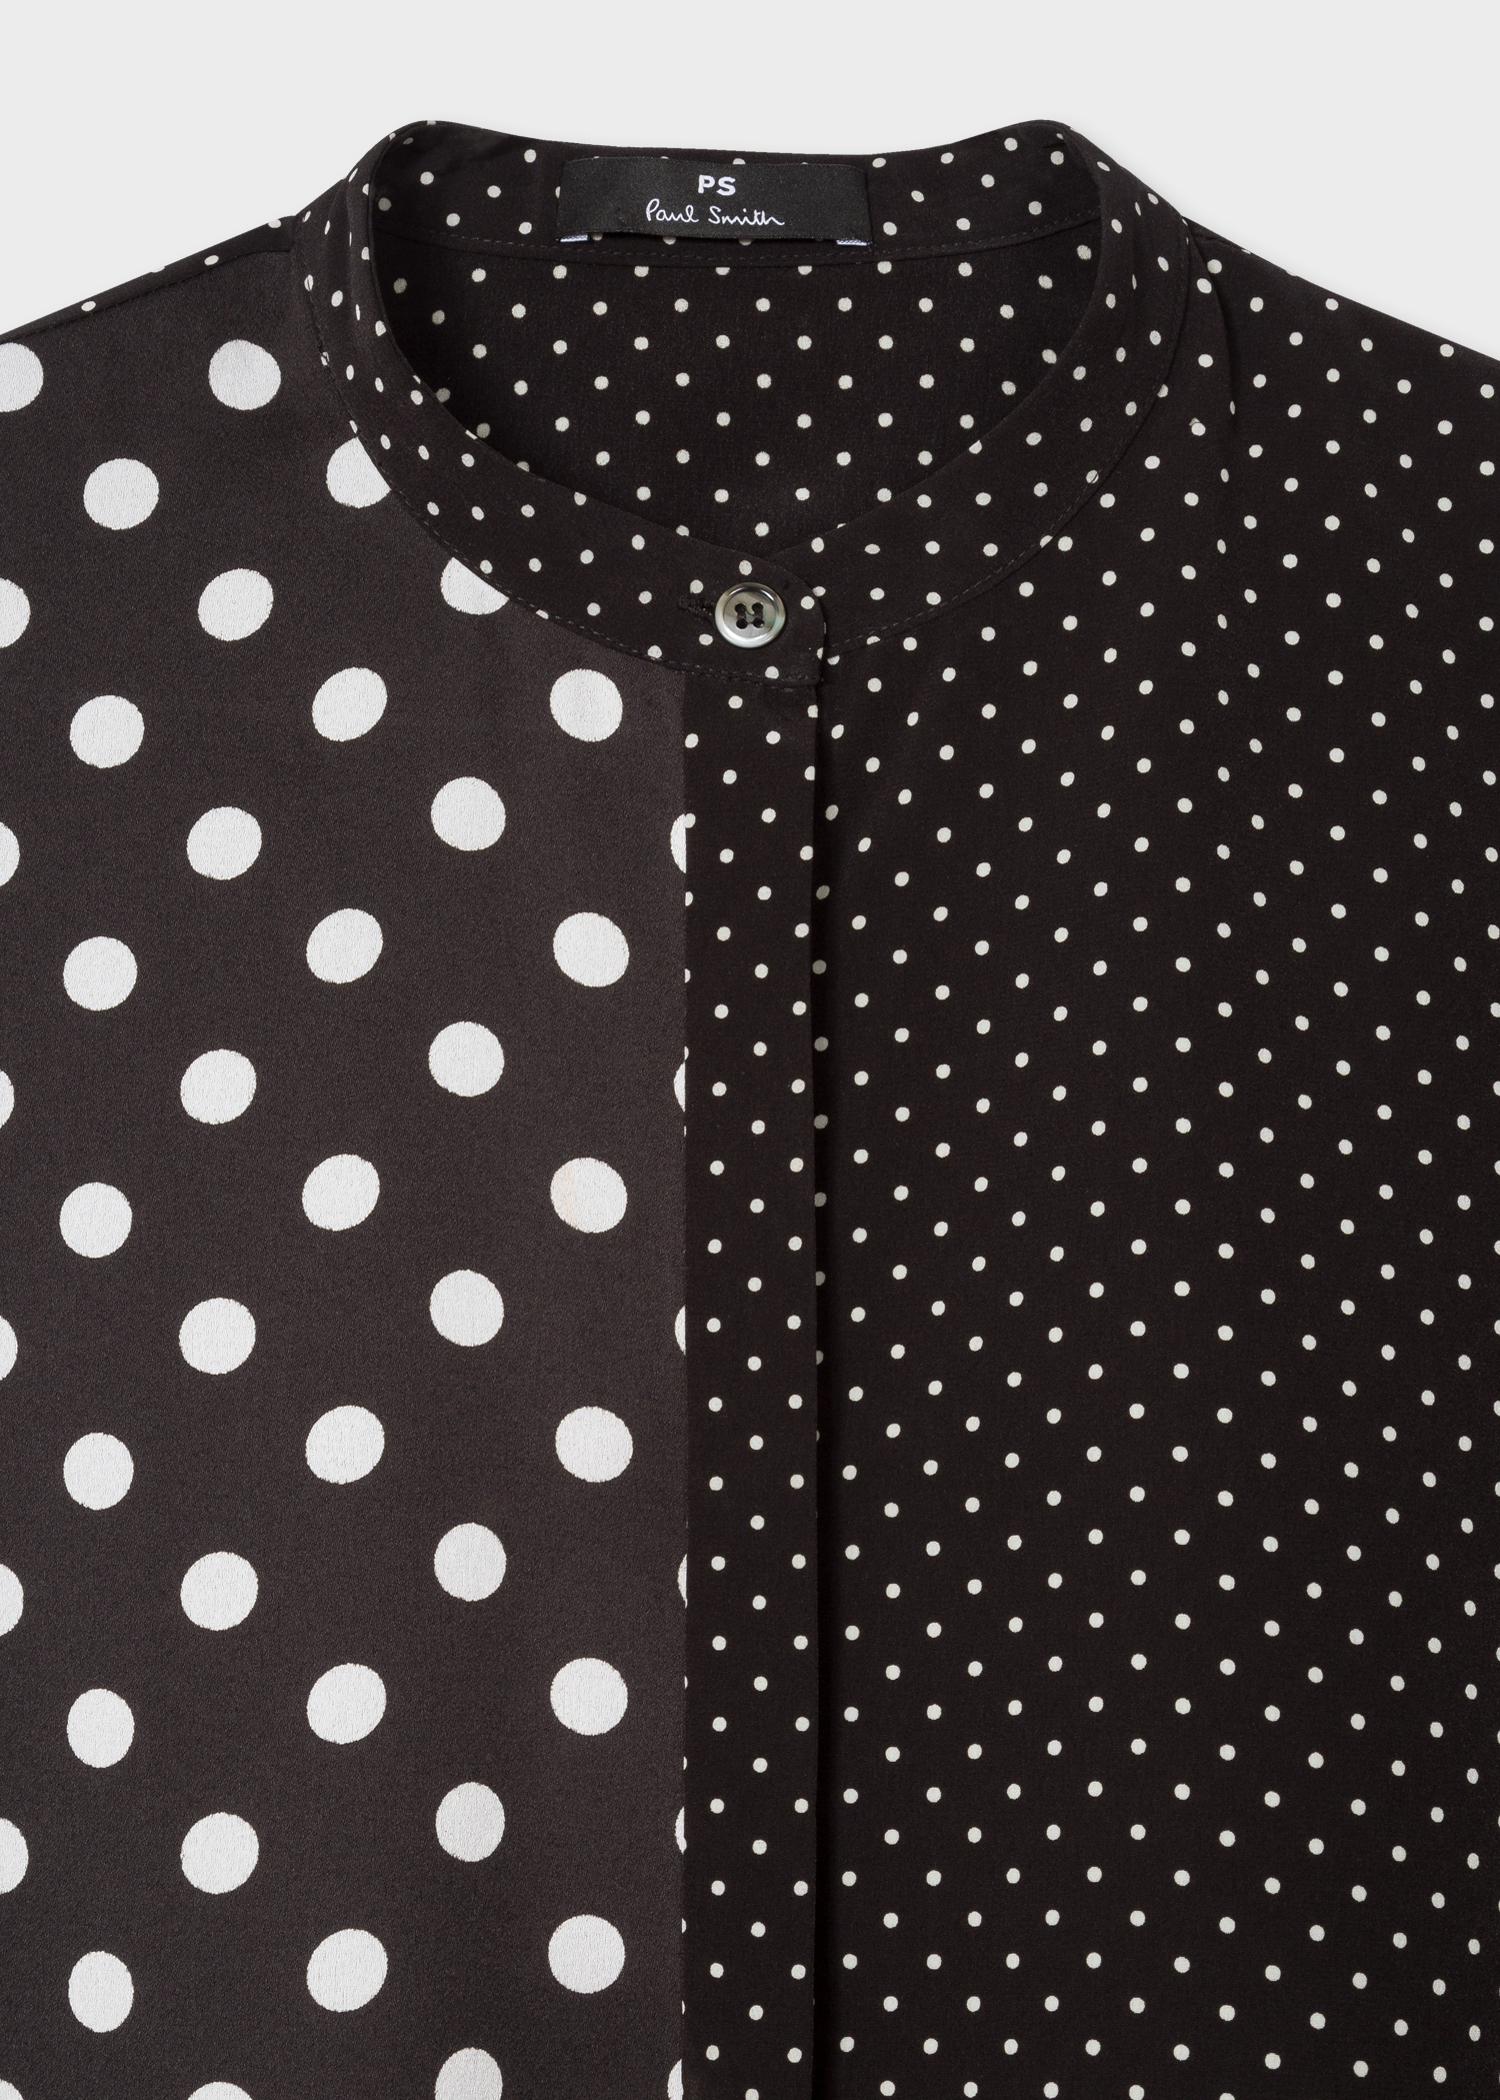 Women's Black And White Polka Dot Shirt With Tie Cuffs - Paul Smith US